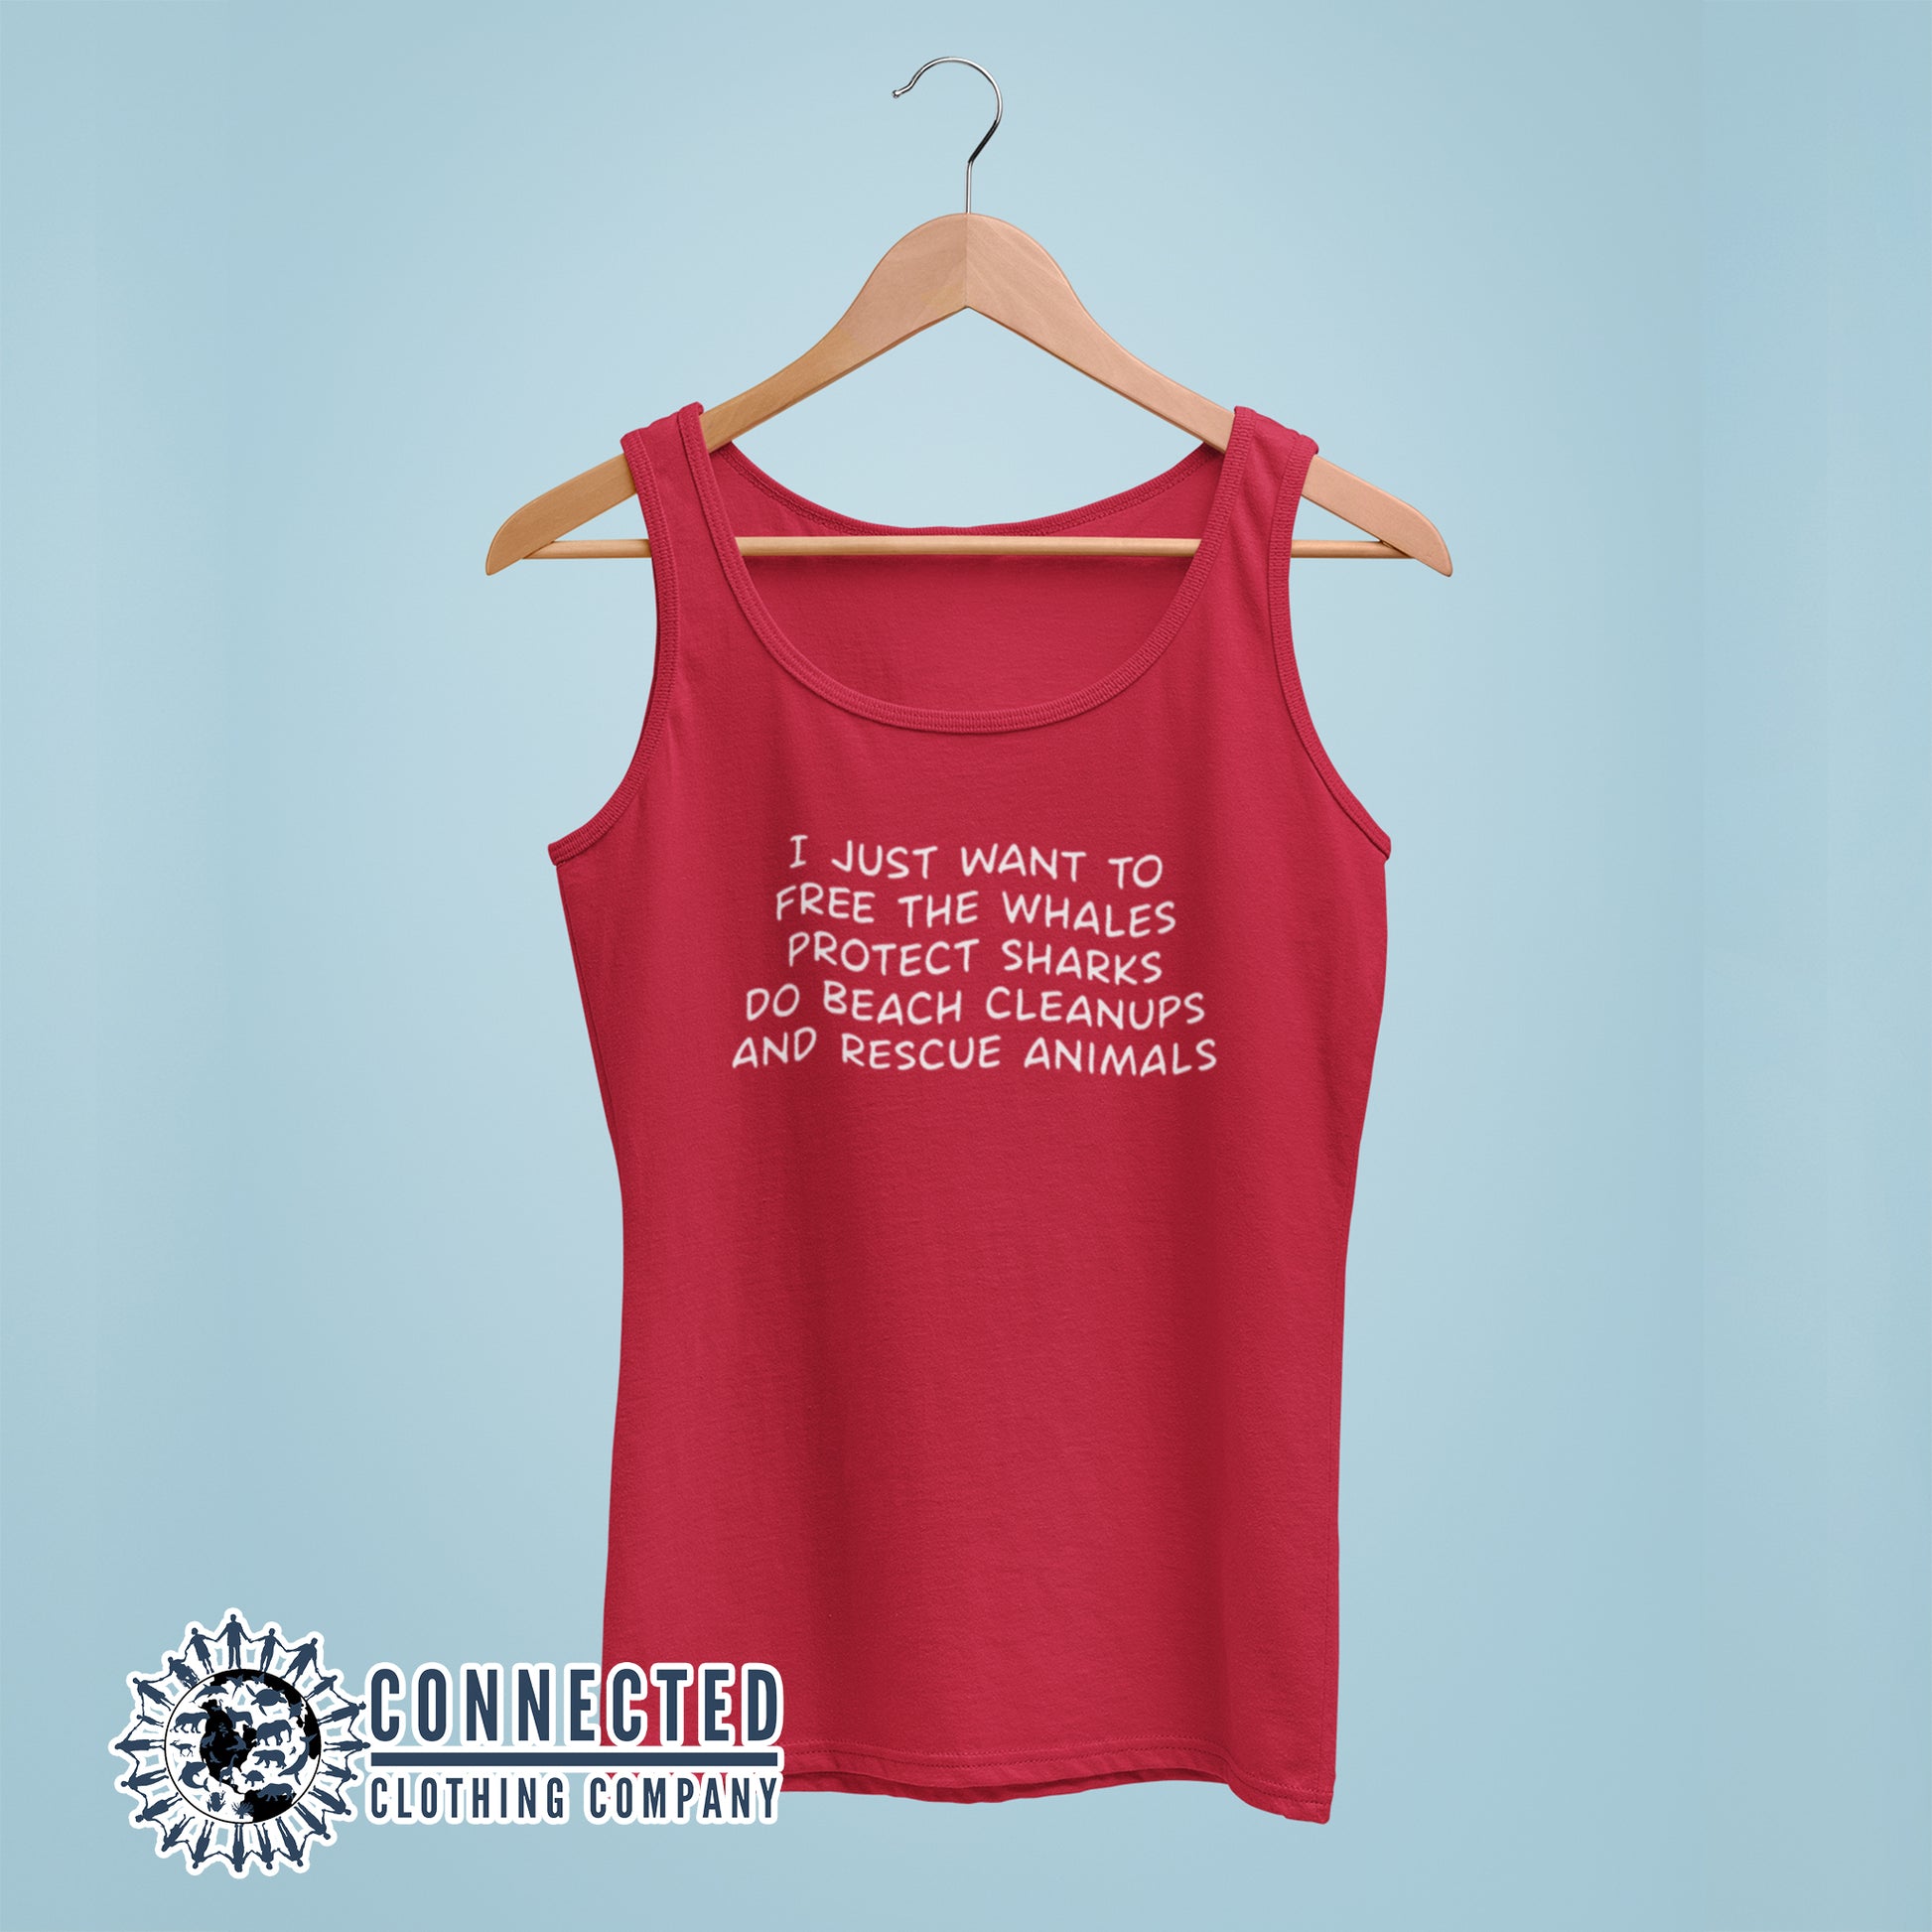 Red I Just Want To Save The World Women's Tank Top reads "I just want to free the whales, protect sharks, do beach cleanups, and rescue animals" - sweetsherriloudesigns - 10% of profits donated to Mission Blue ocean conservation